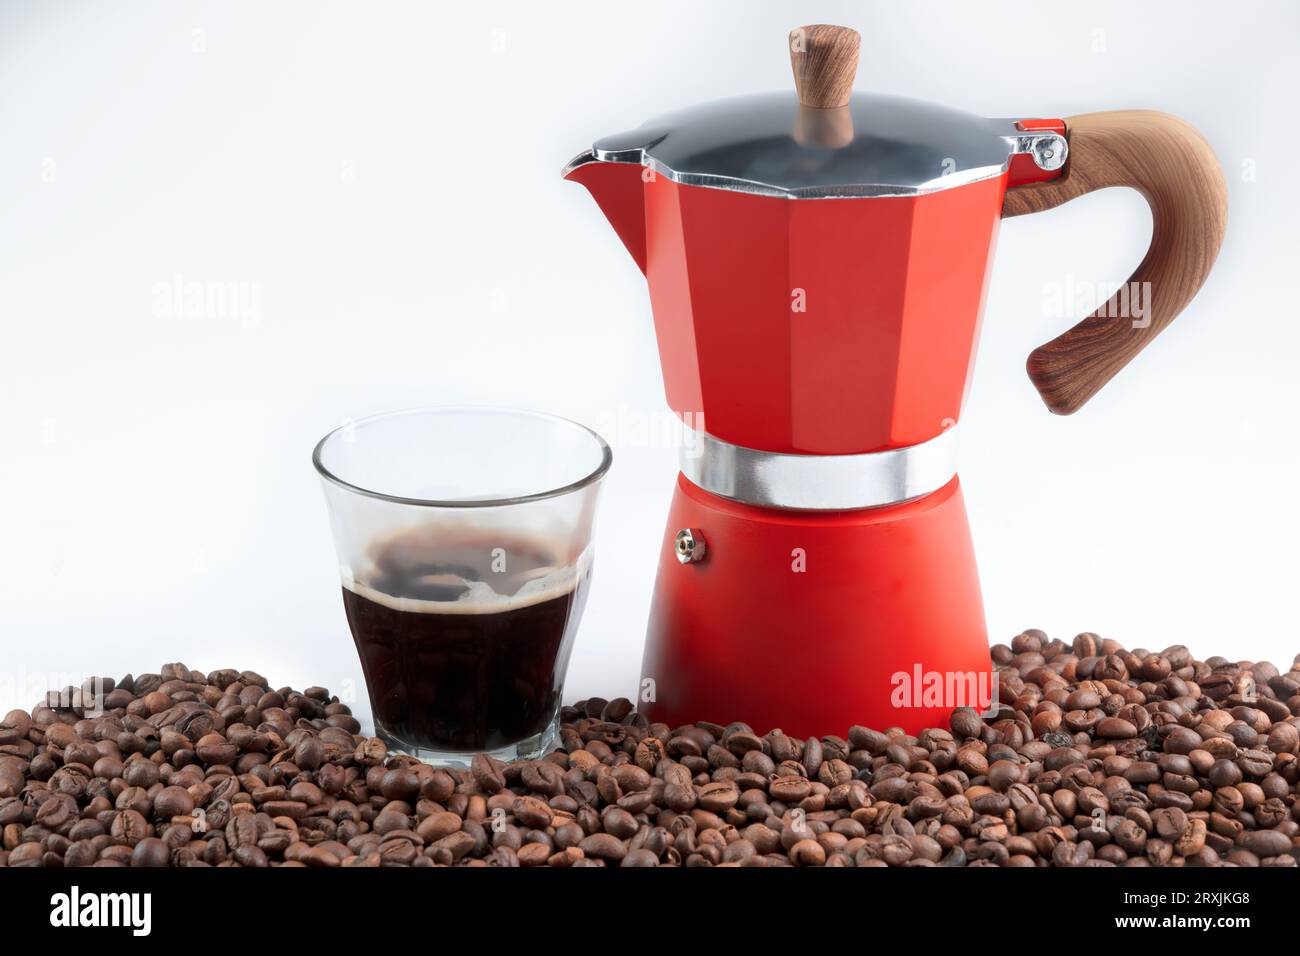 https://c8.alamy.com/comp/2RXJKG8/coffee-beans-and-a-cup-of-coffee-with-a-moka-pot-coffee-maker-isolated-over-a-white-background-2RXJKG8.jpg